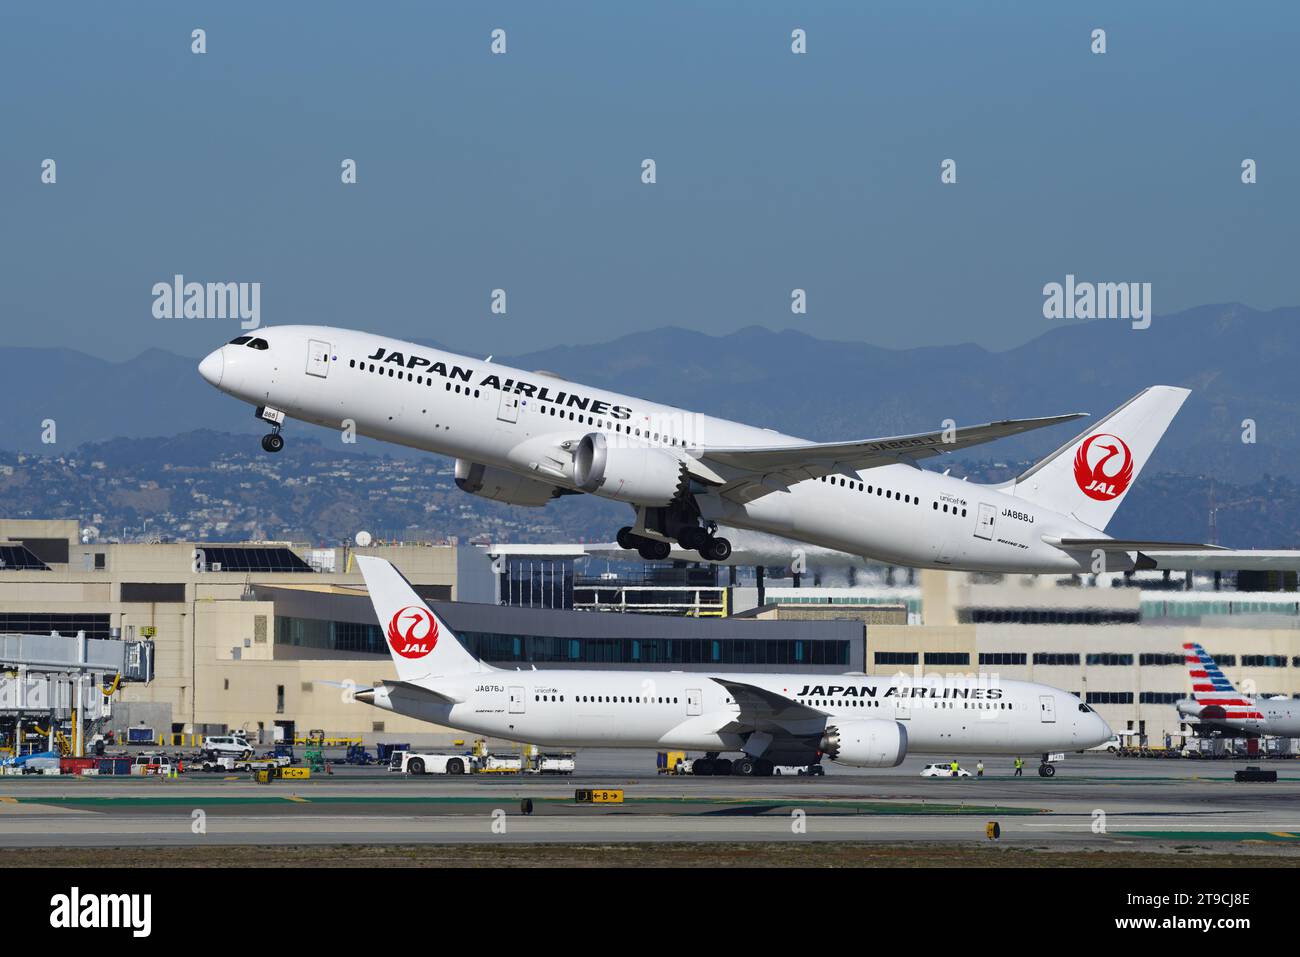 Two Japan Airlines, JAL, Boeing 787 airplanes shown taxiing and airborne, respectively. Shown at LAX, Los Angeles International Airport. Stock Photo